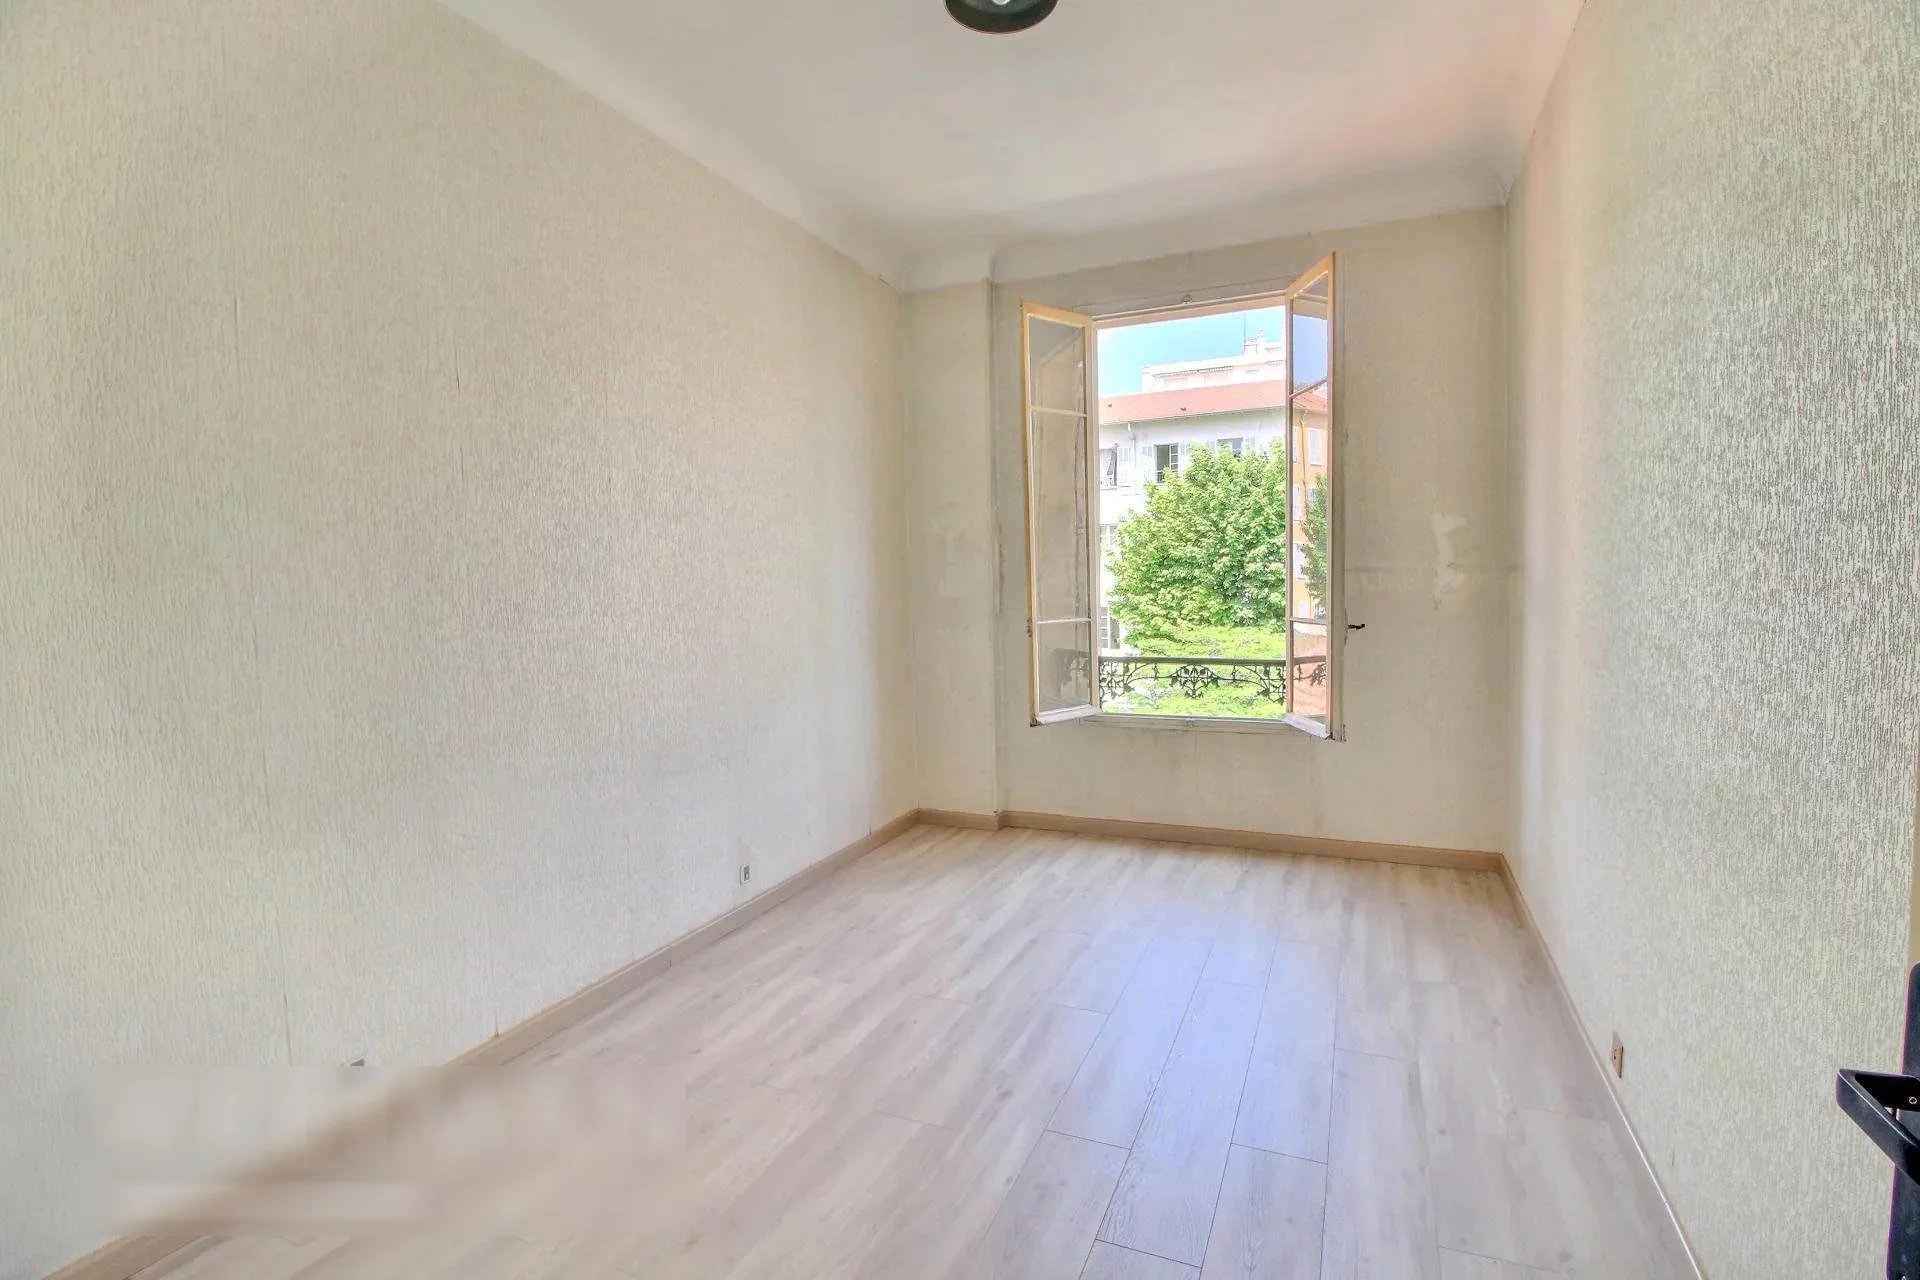 2 bedroom apartment with open view